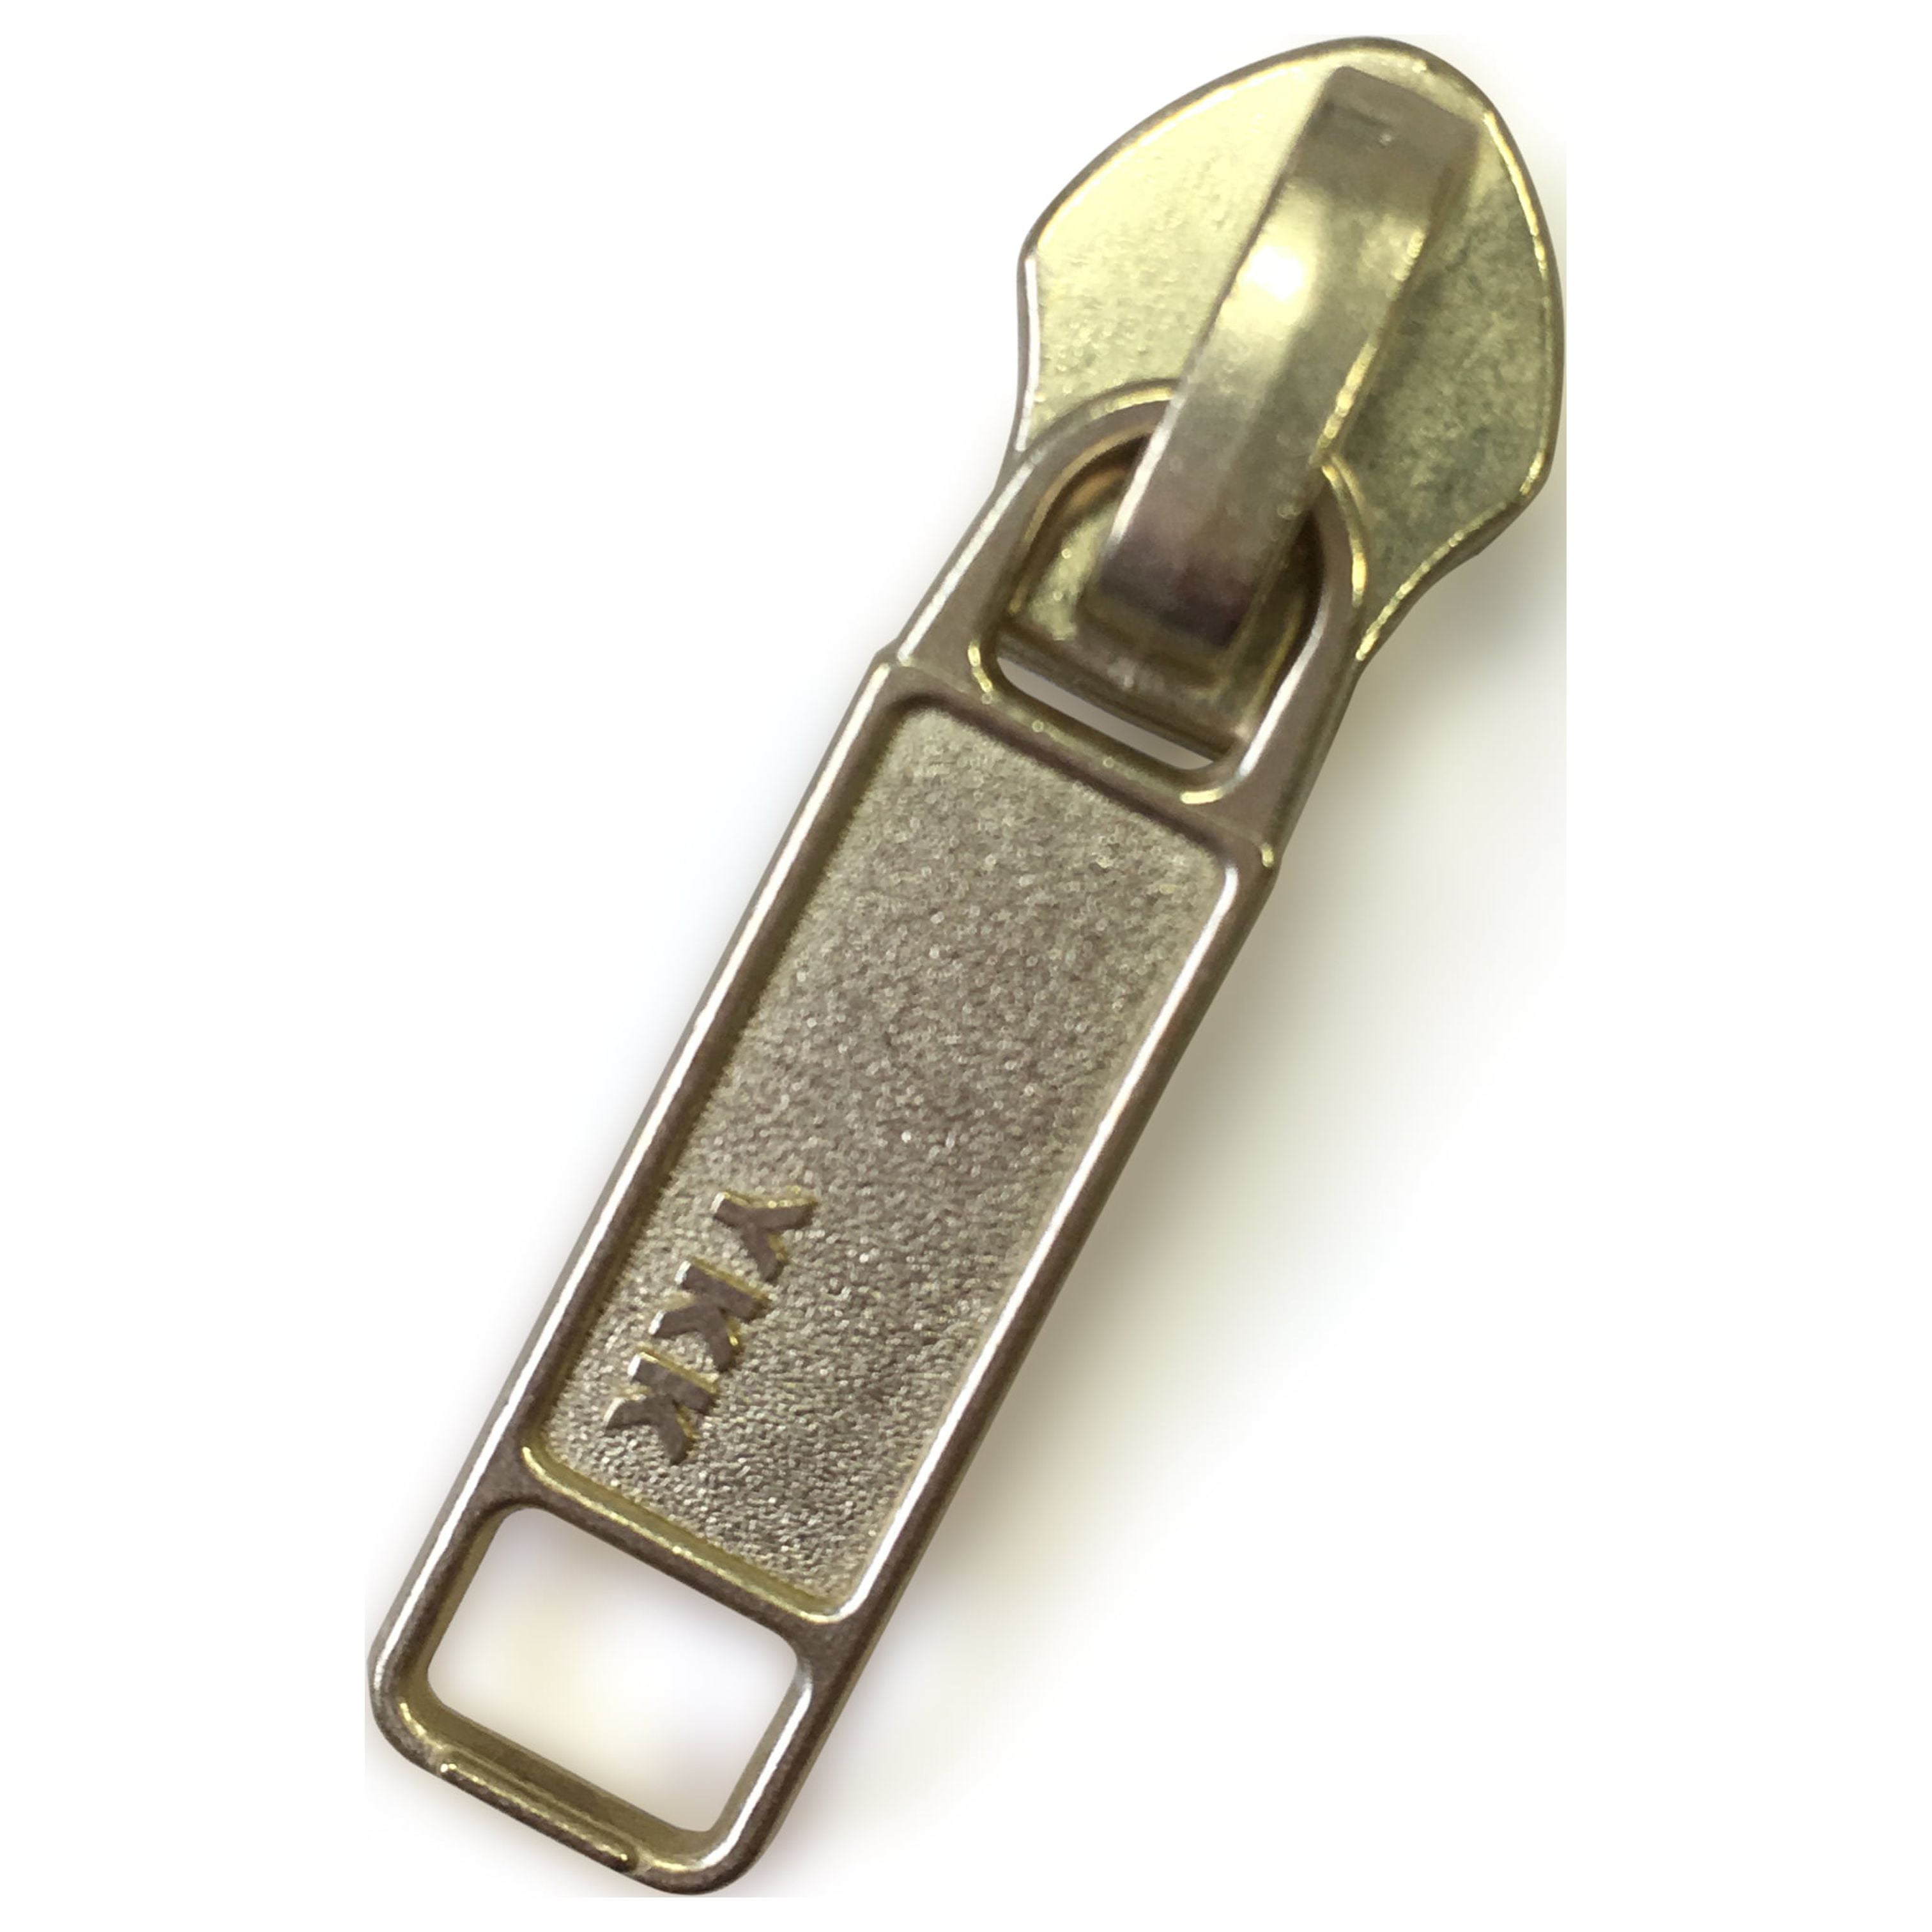 #5 YKK CN Double Pull Zipper Slider. These Sliders are Made for YKK CN  Coil. (Qty 50)